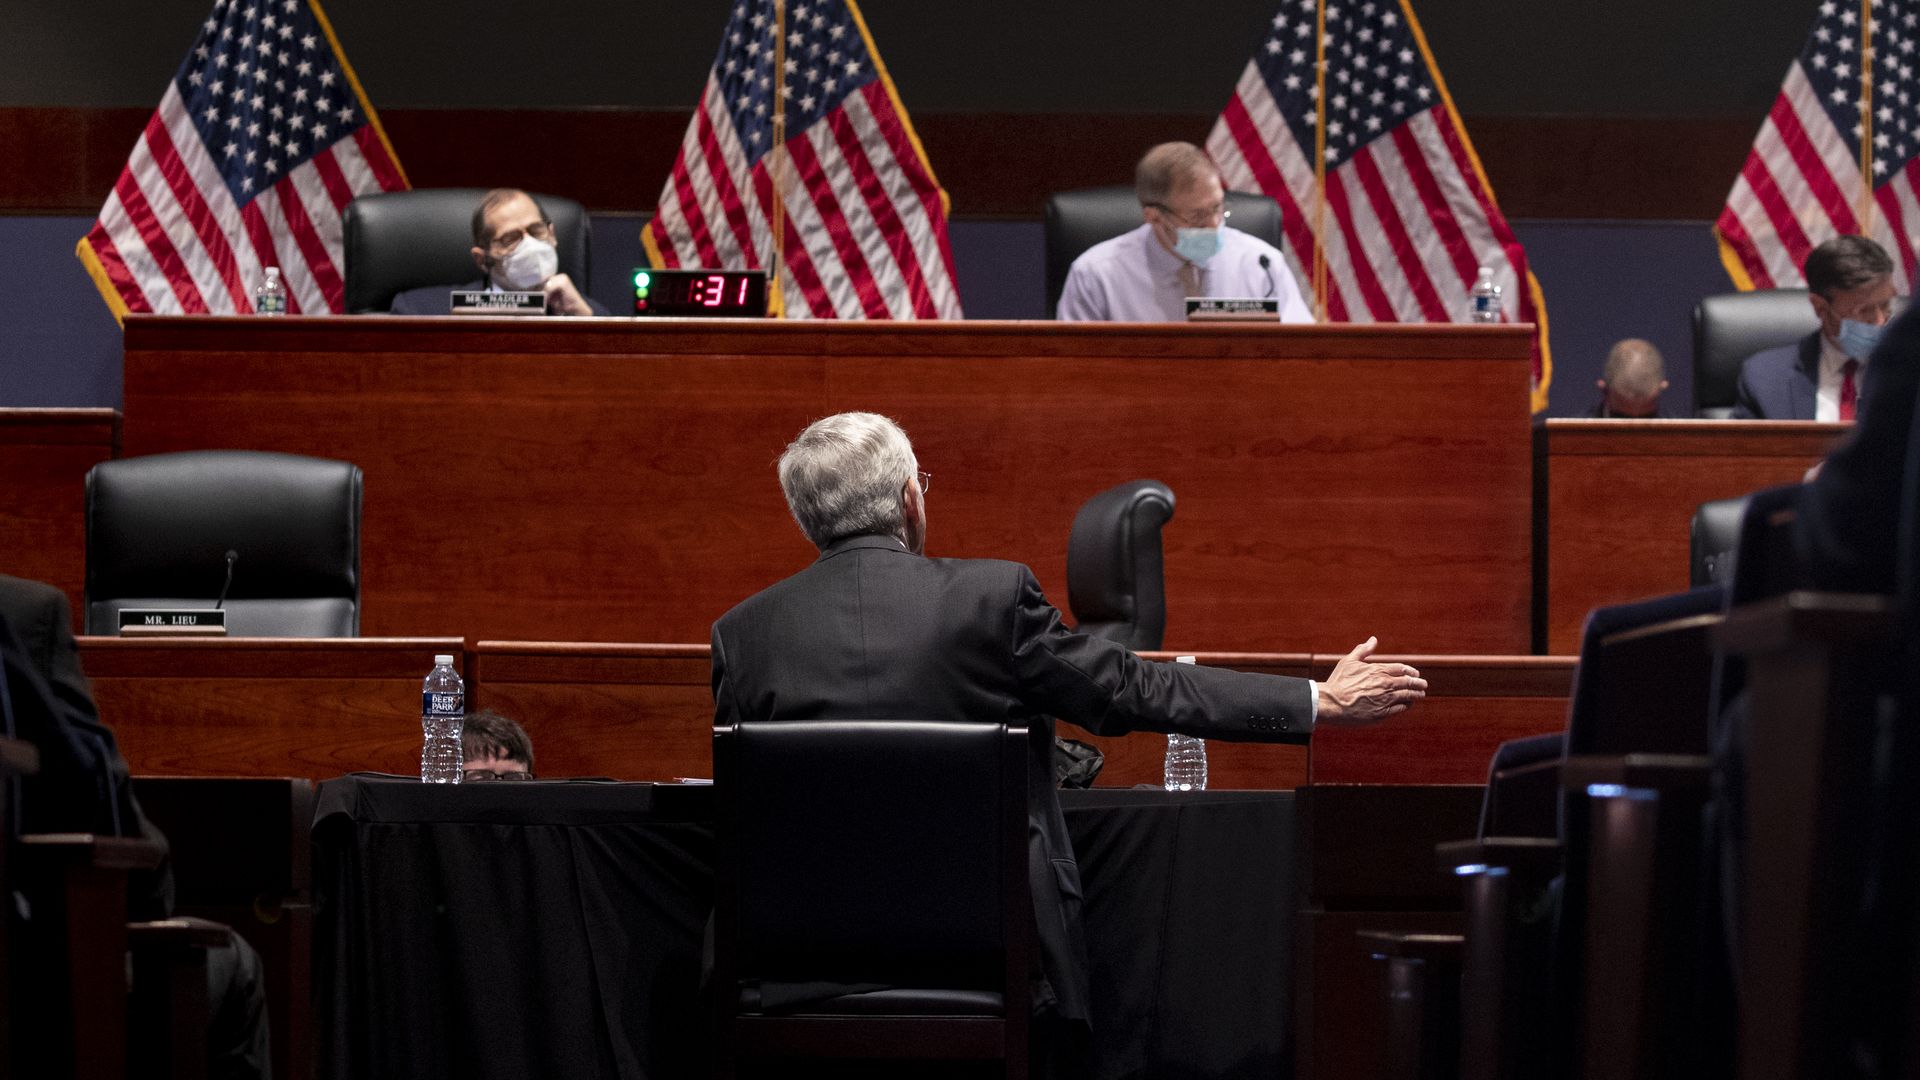 Attorney General Merrick Garland is seen from behind as he testifies before the House Judiciary Committee.